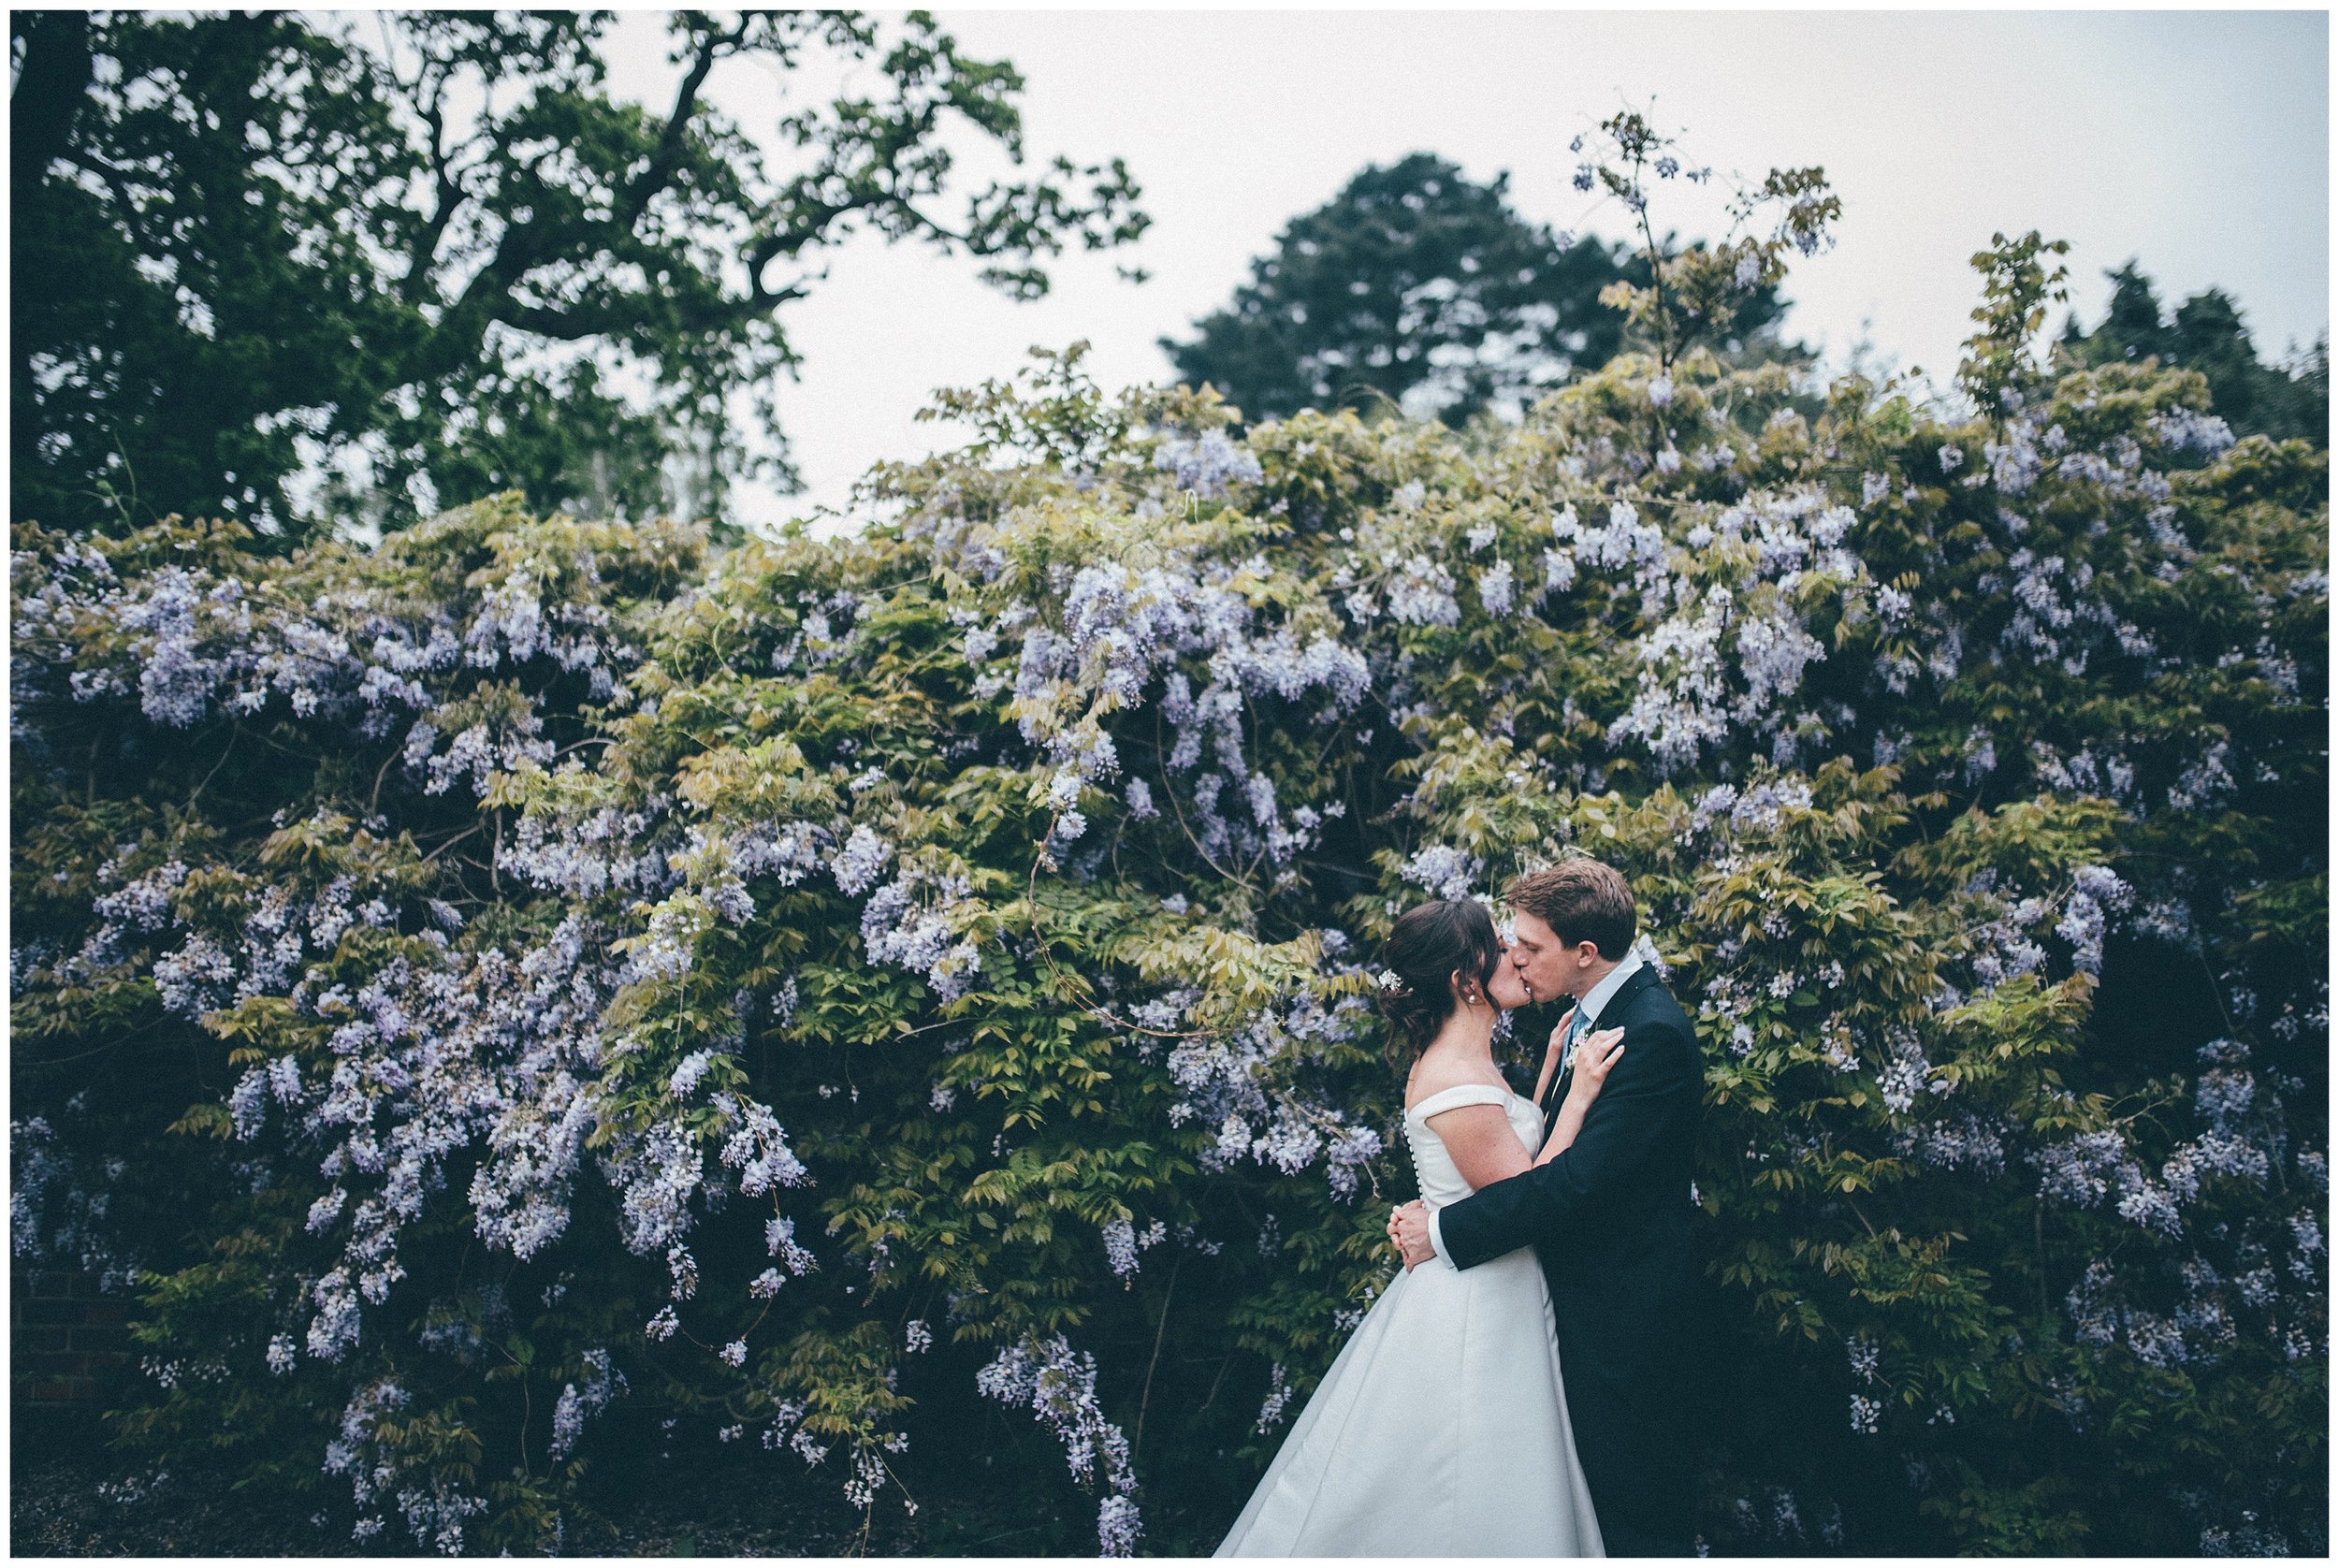 Bride and groom in front of beautiful flowers on their wedding day at Henham Park.